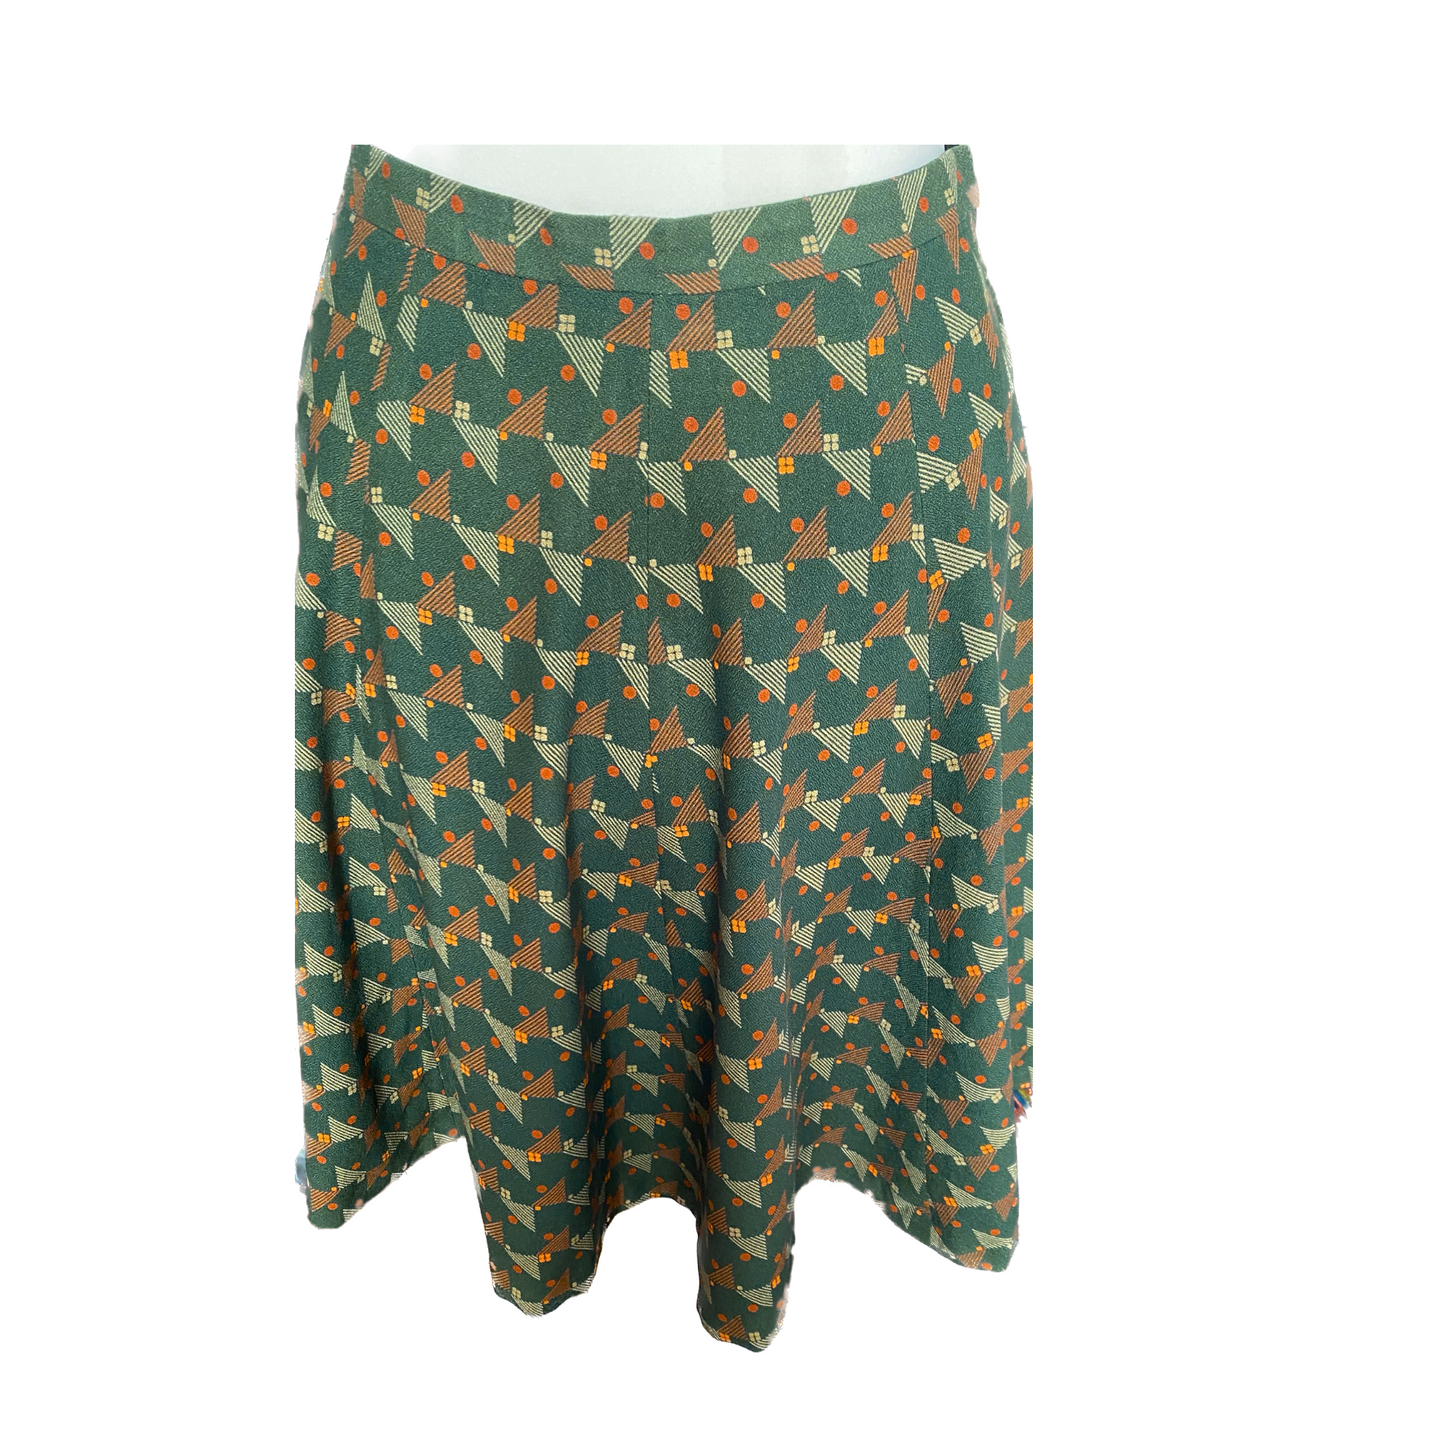 green and orange skirt with skater-style silhouette - Great for everyday wear